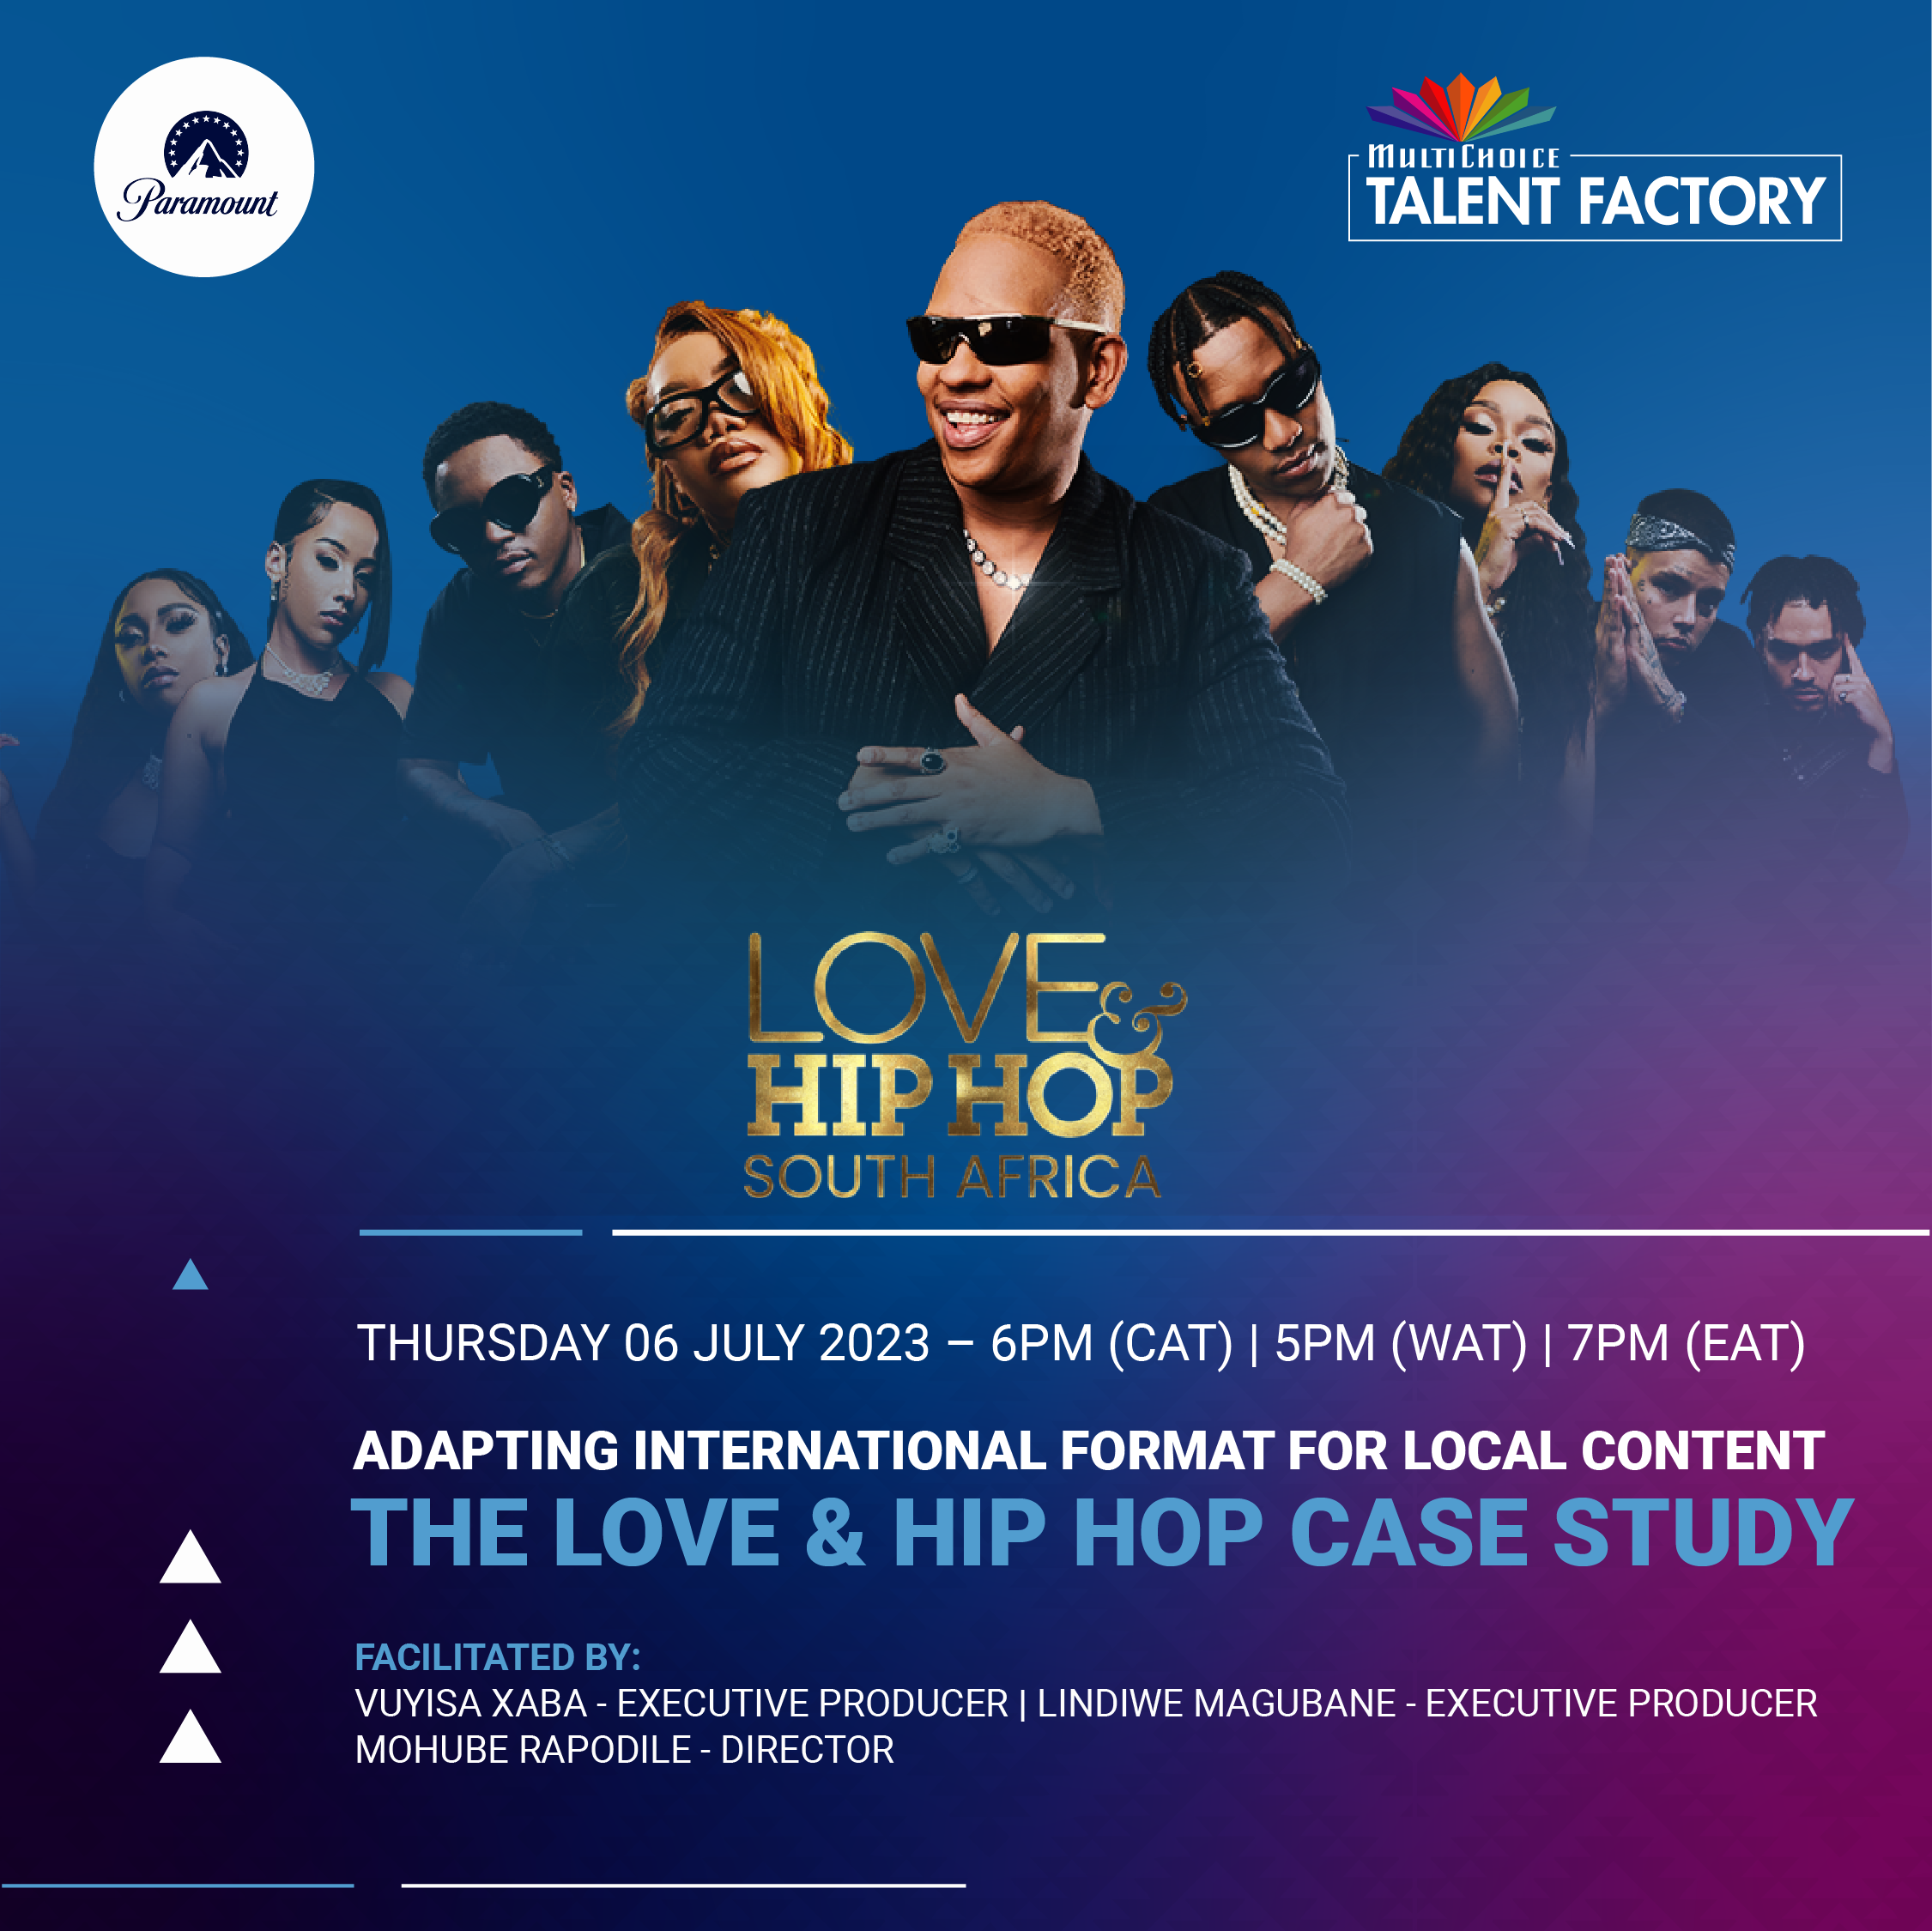 Multichoice talent factory and Paramount bring a masterclass on adapting international formats